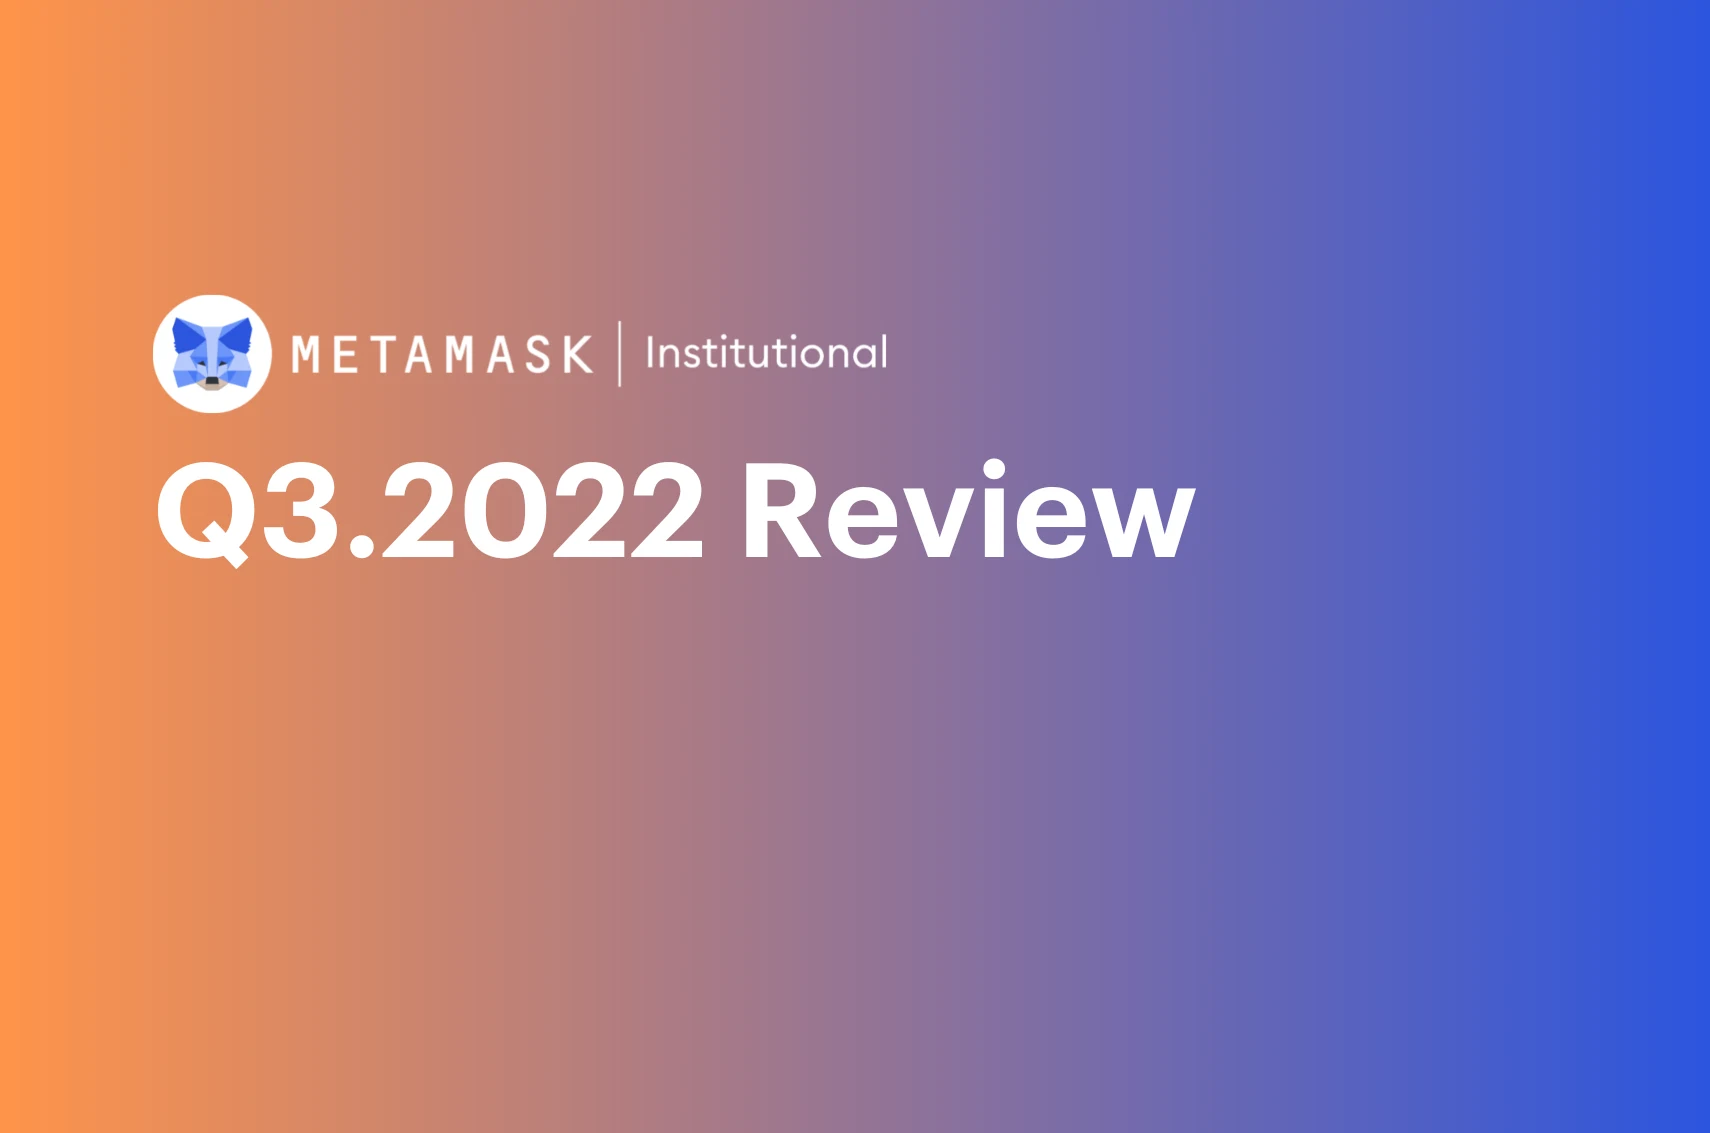 Image: Q3.2022 Review from MetaMask Institutional